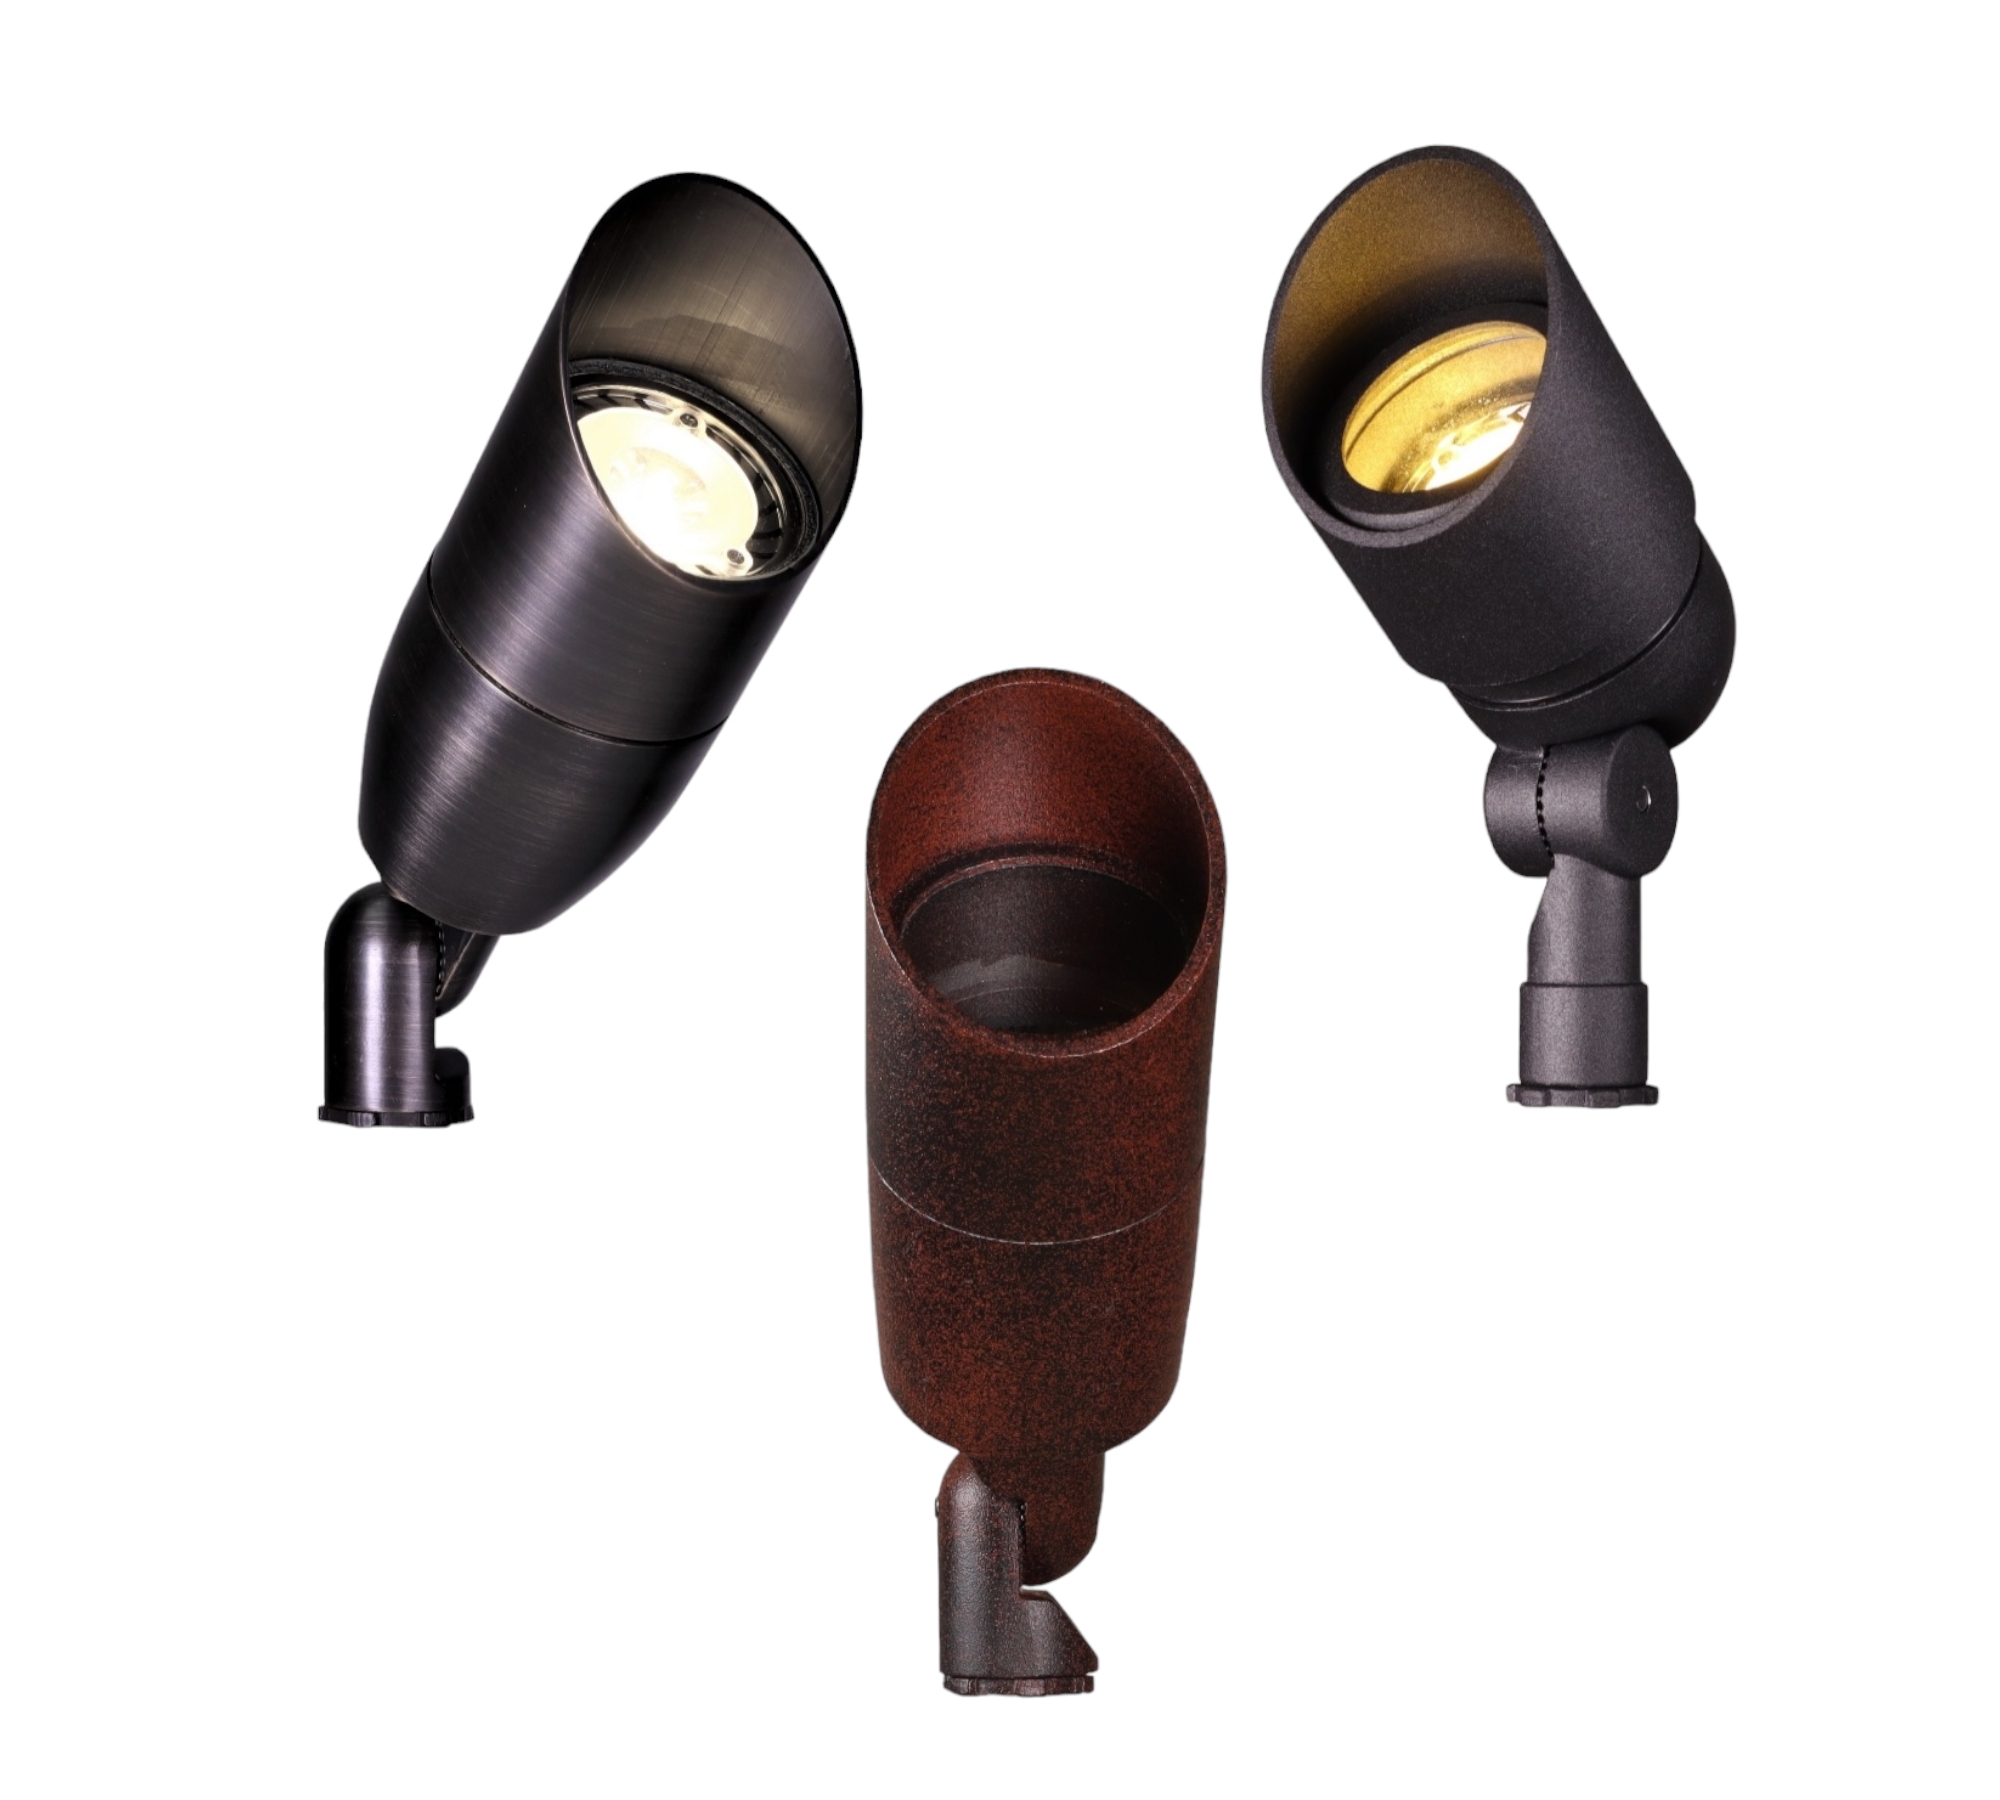 Premium Outdoor Lighting and Audio Systems